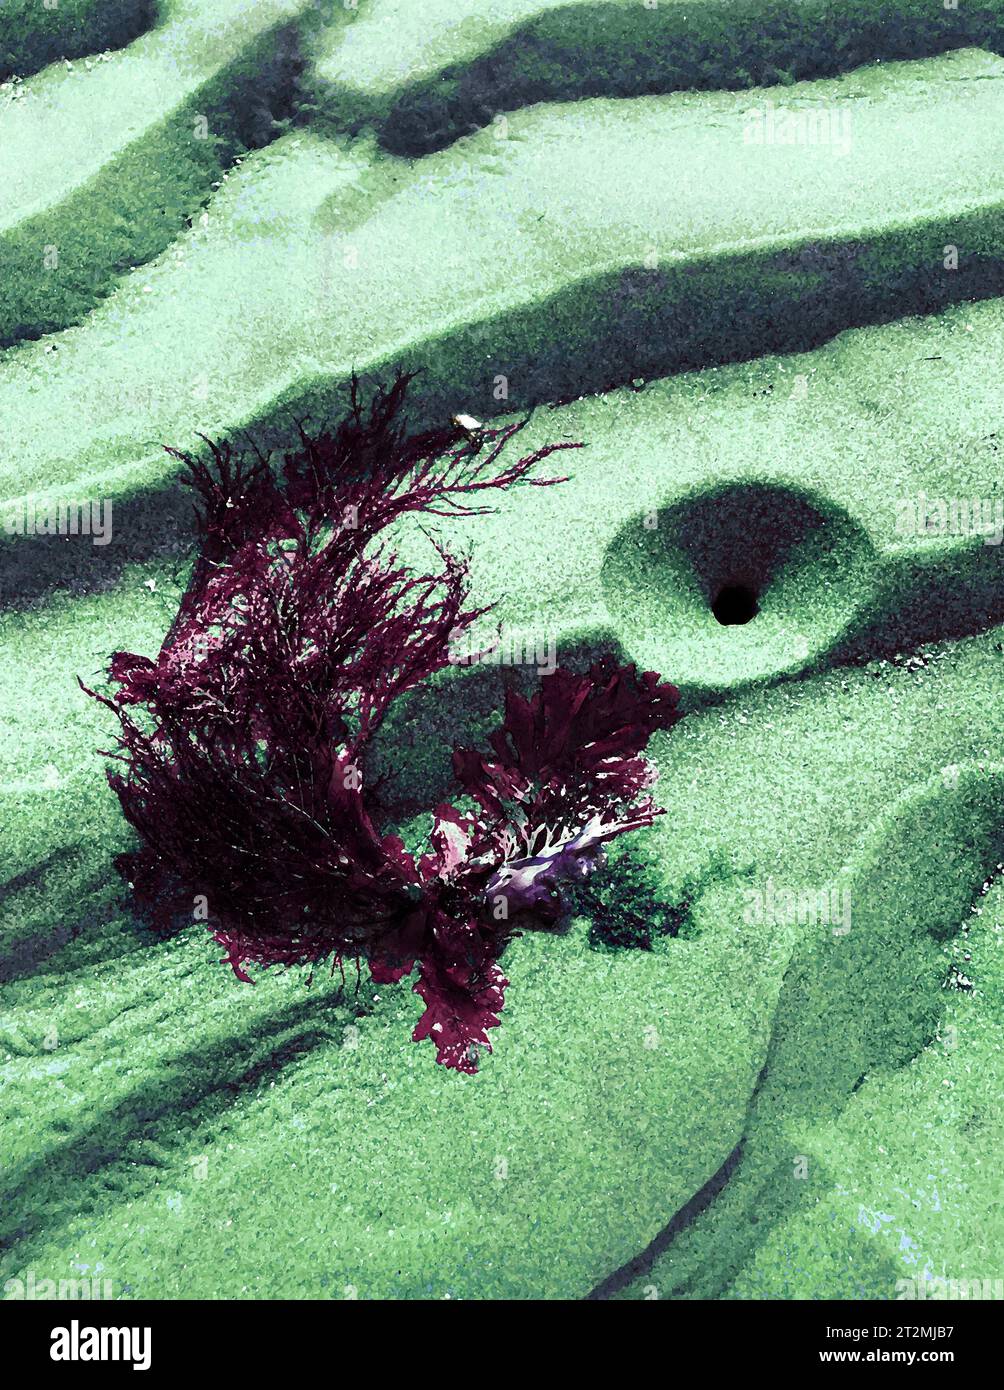 Concept art, red seaweed (Ceramium virgatum) on green beach, illustrating the saying 'red and green should never be seen' referring to ship's lights. Stock Photo